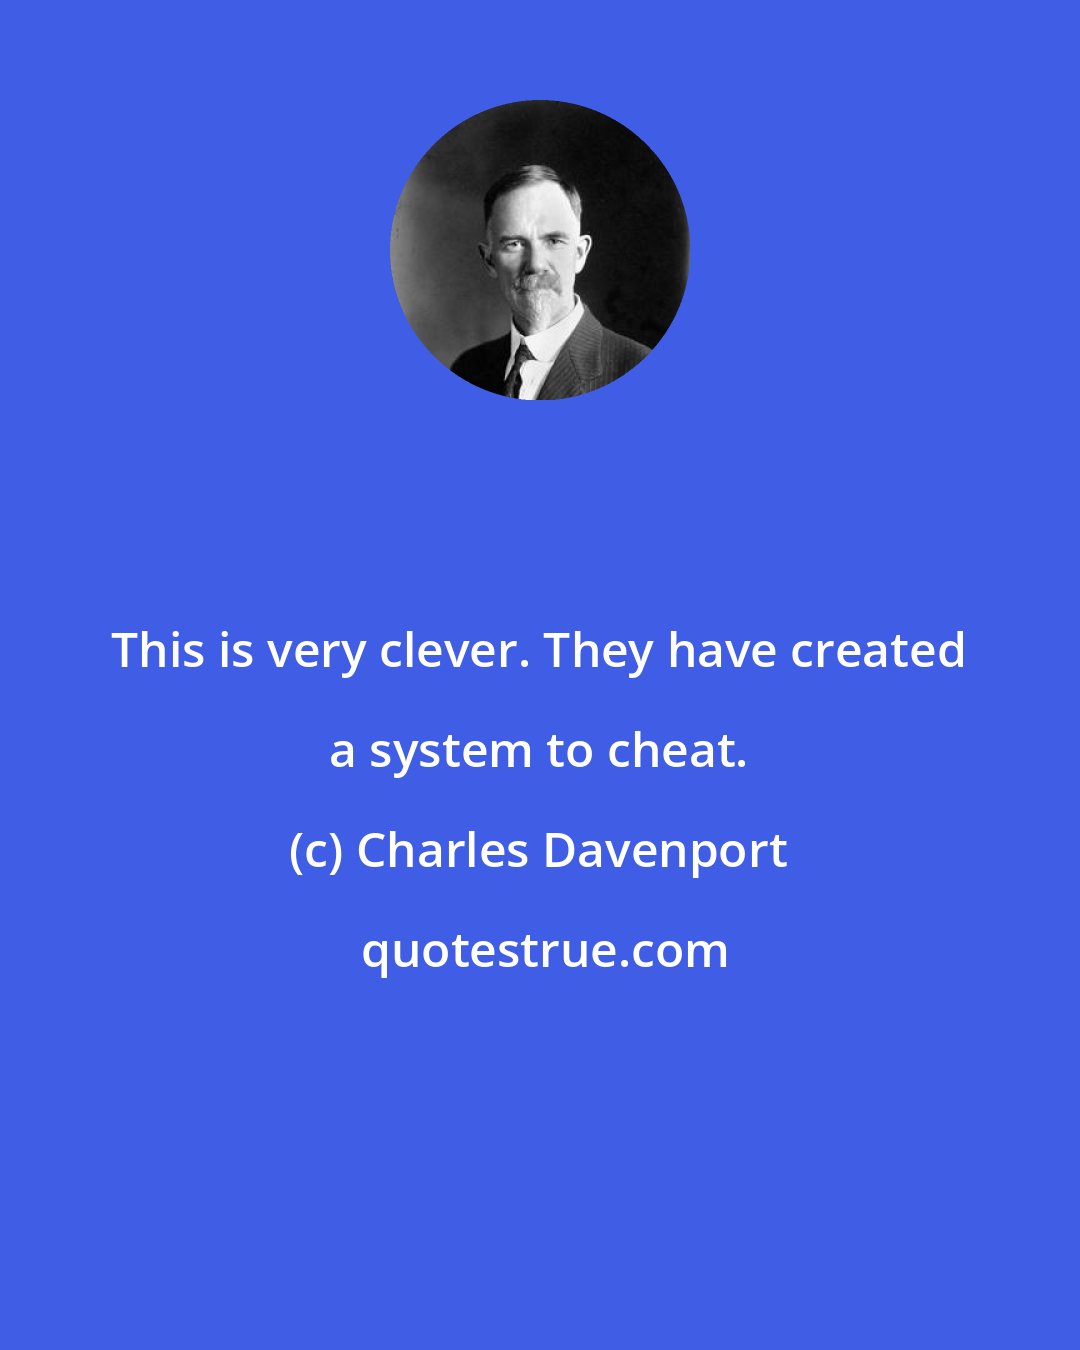 Charles Davenport: This is very clever. They have created a system to cheat.